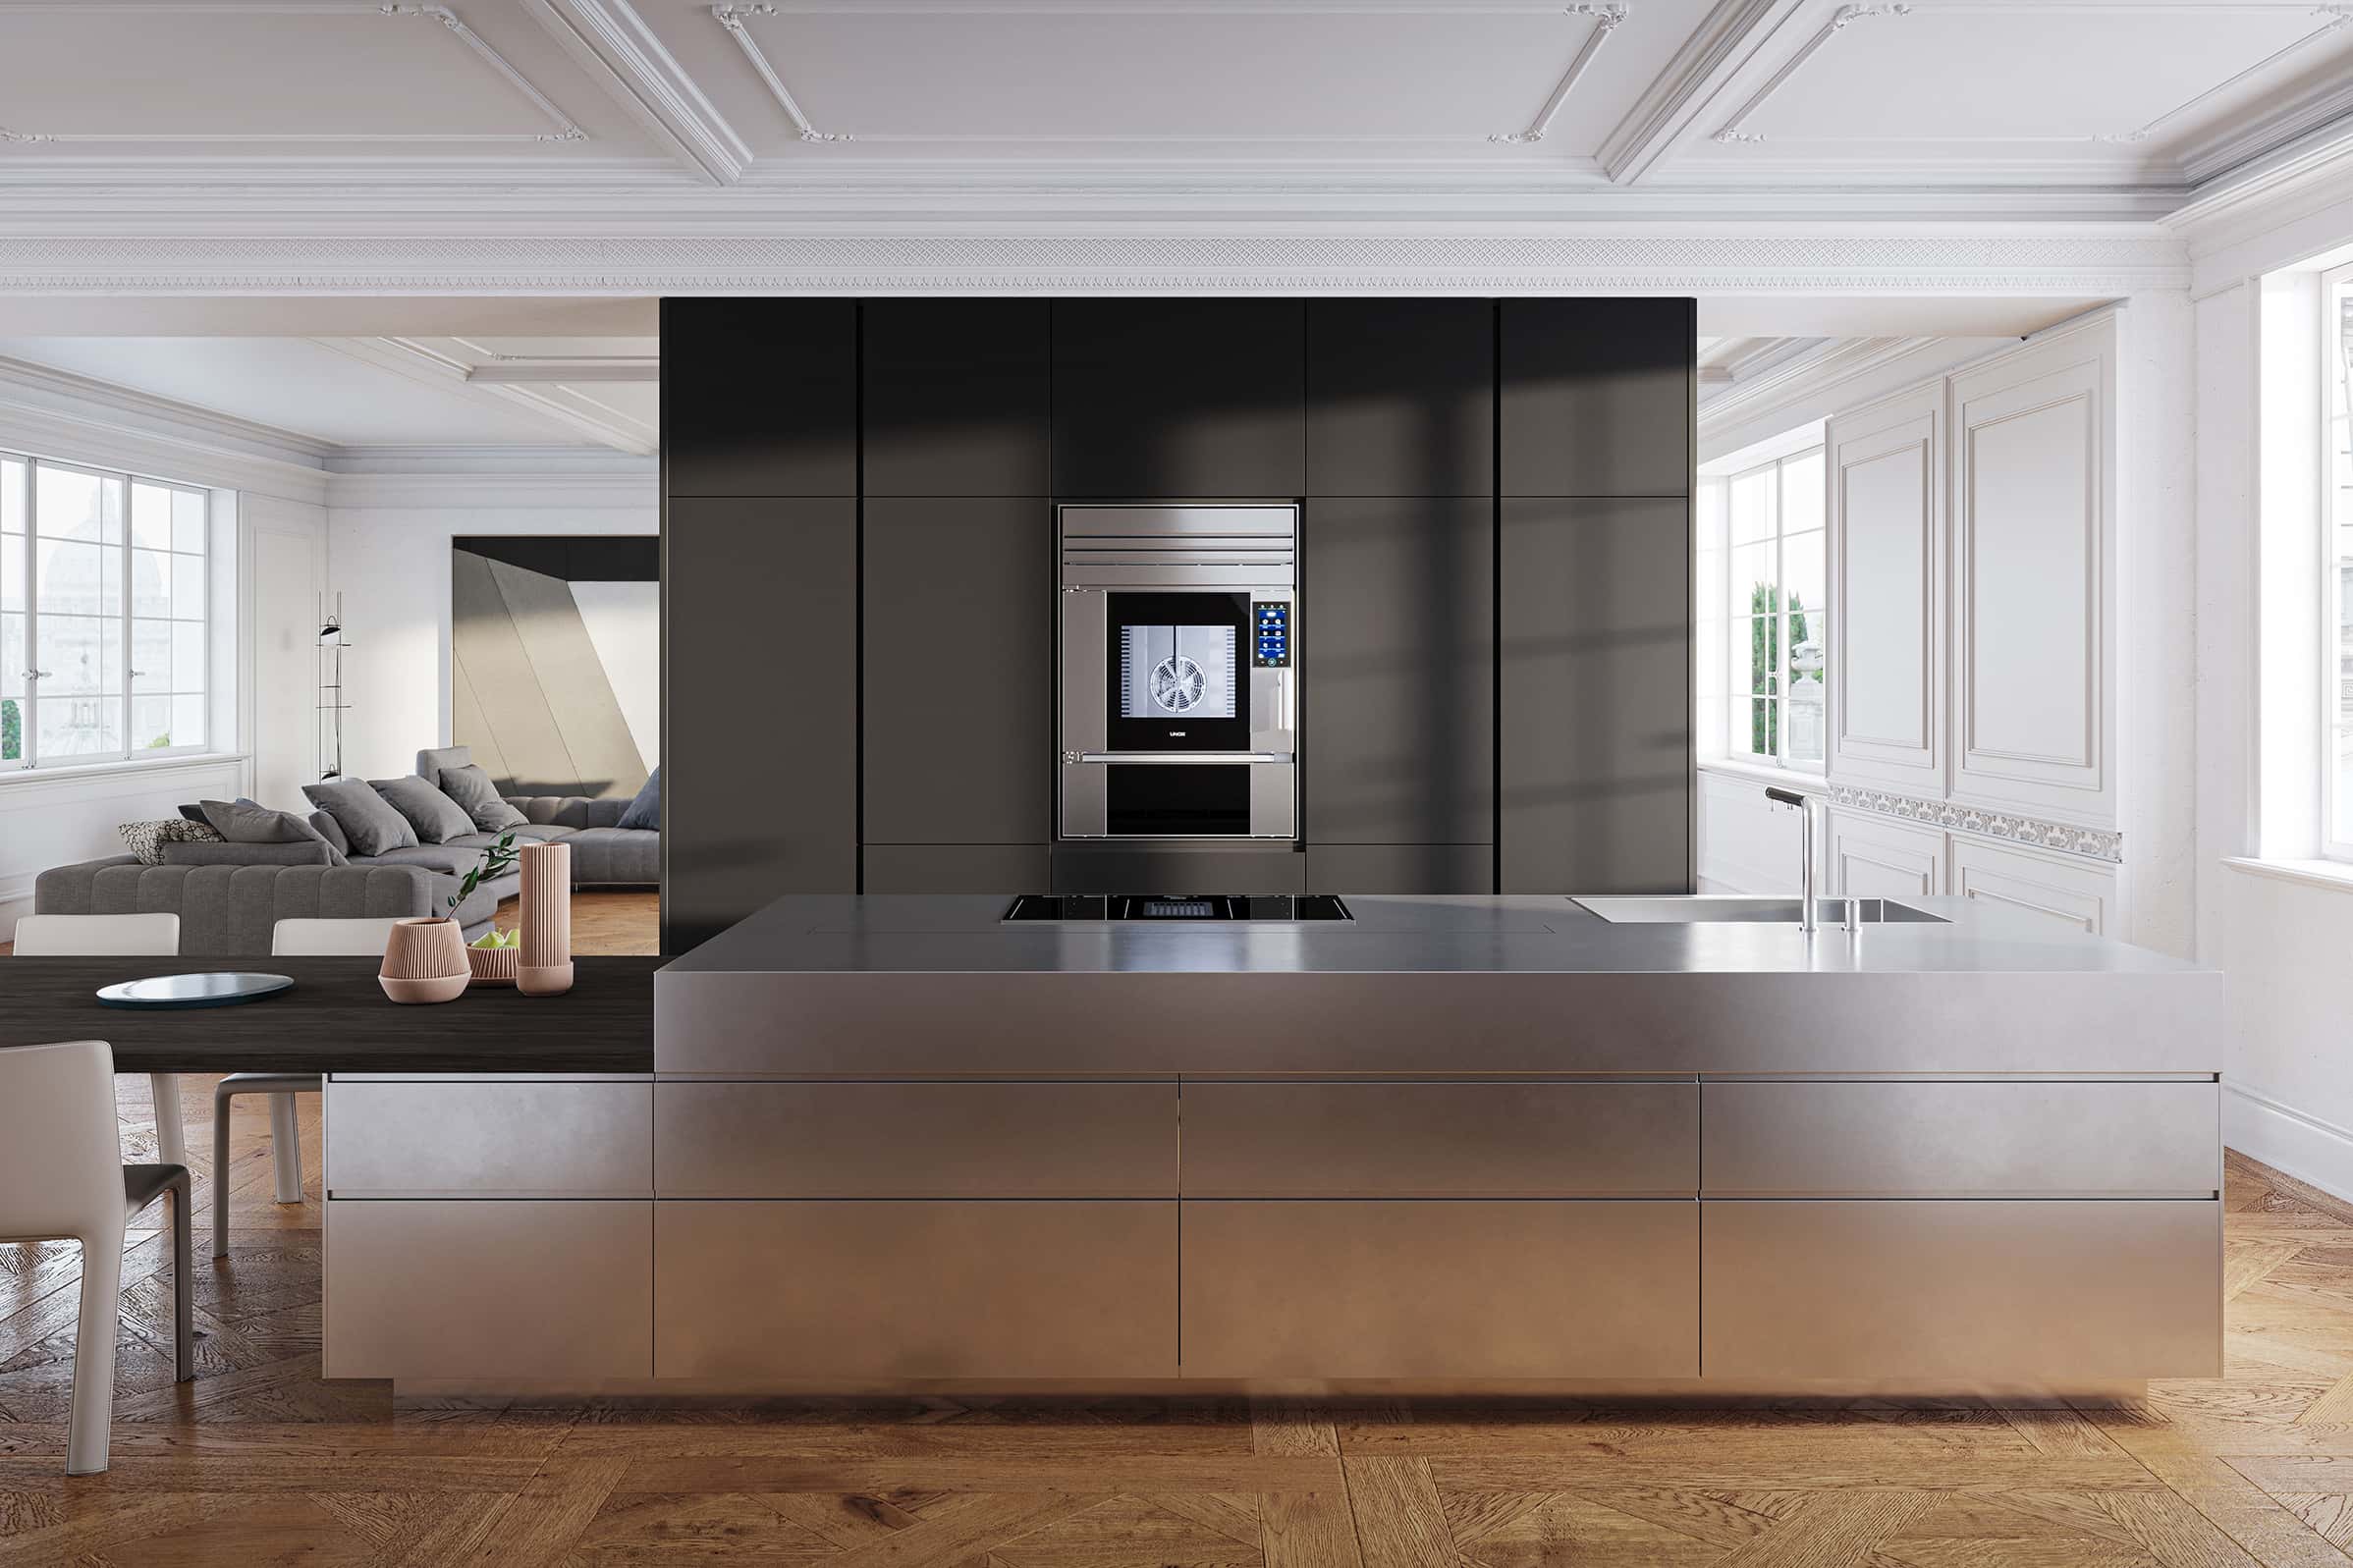 Unox Casa's SuperOven high-end built-in oven for home use inserted in a design kitchen in Paris